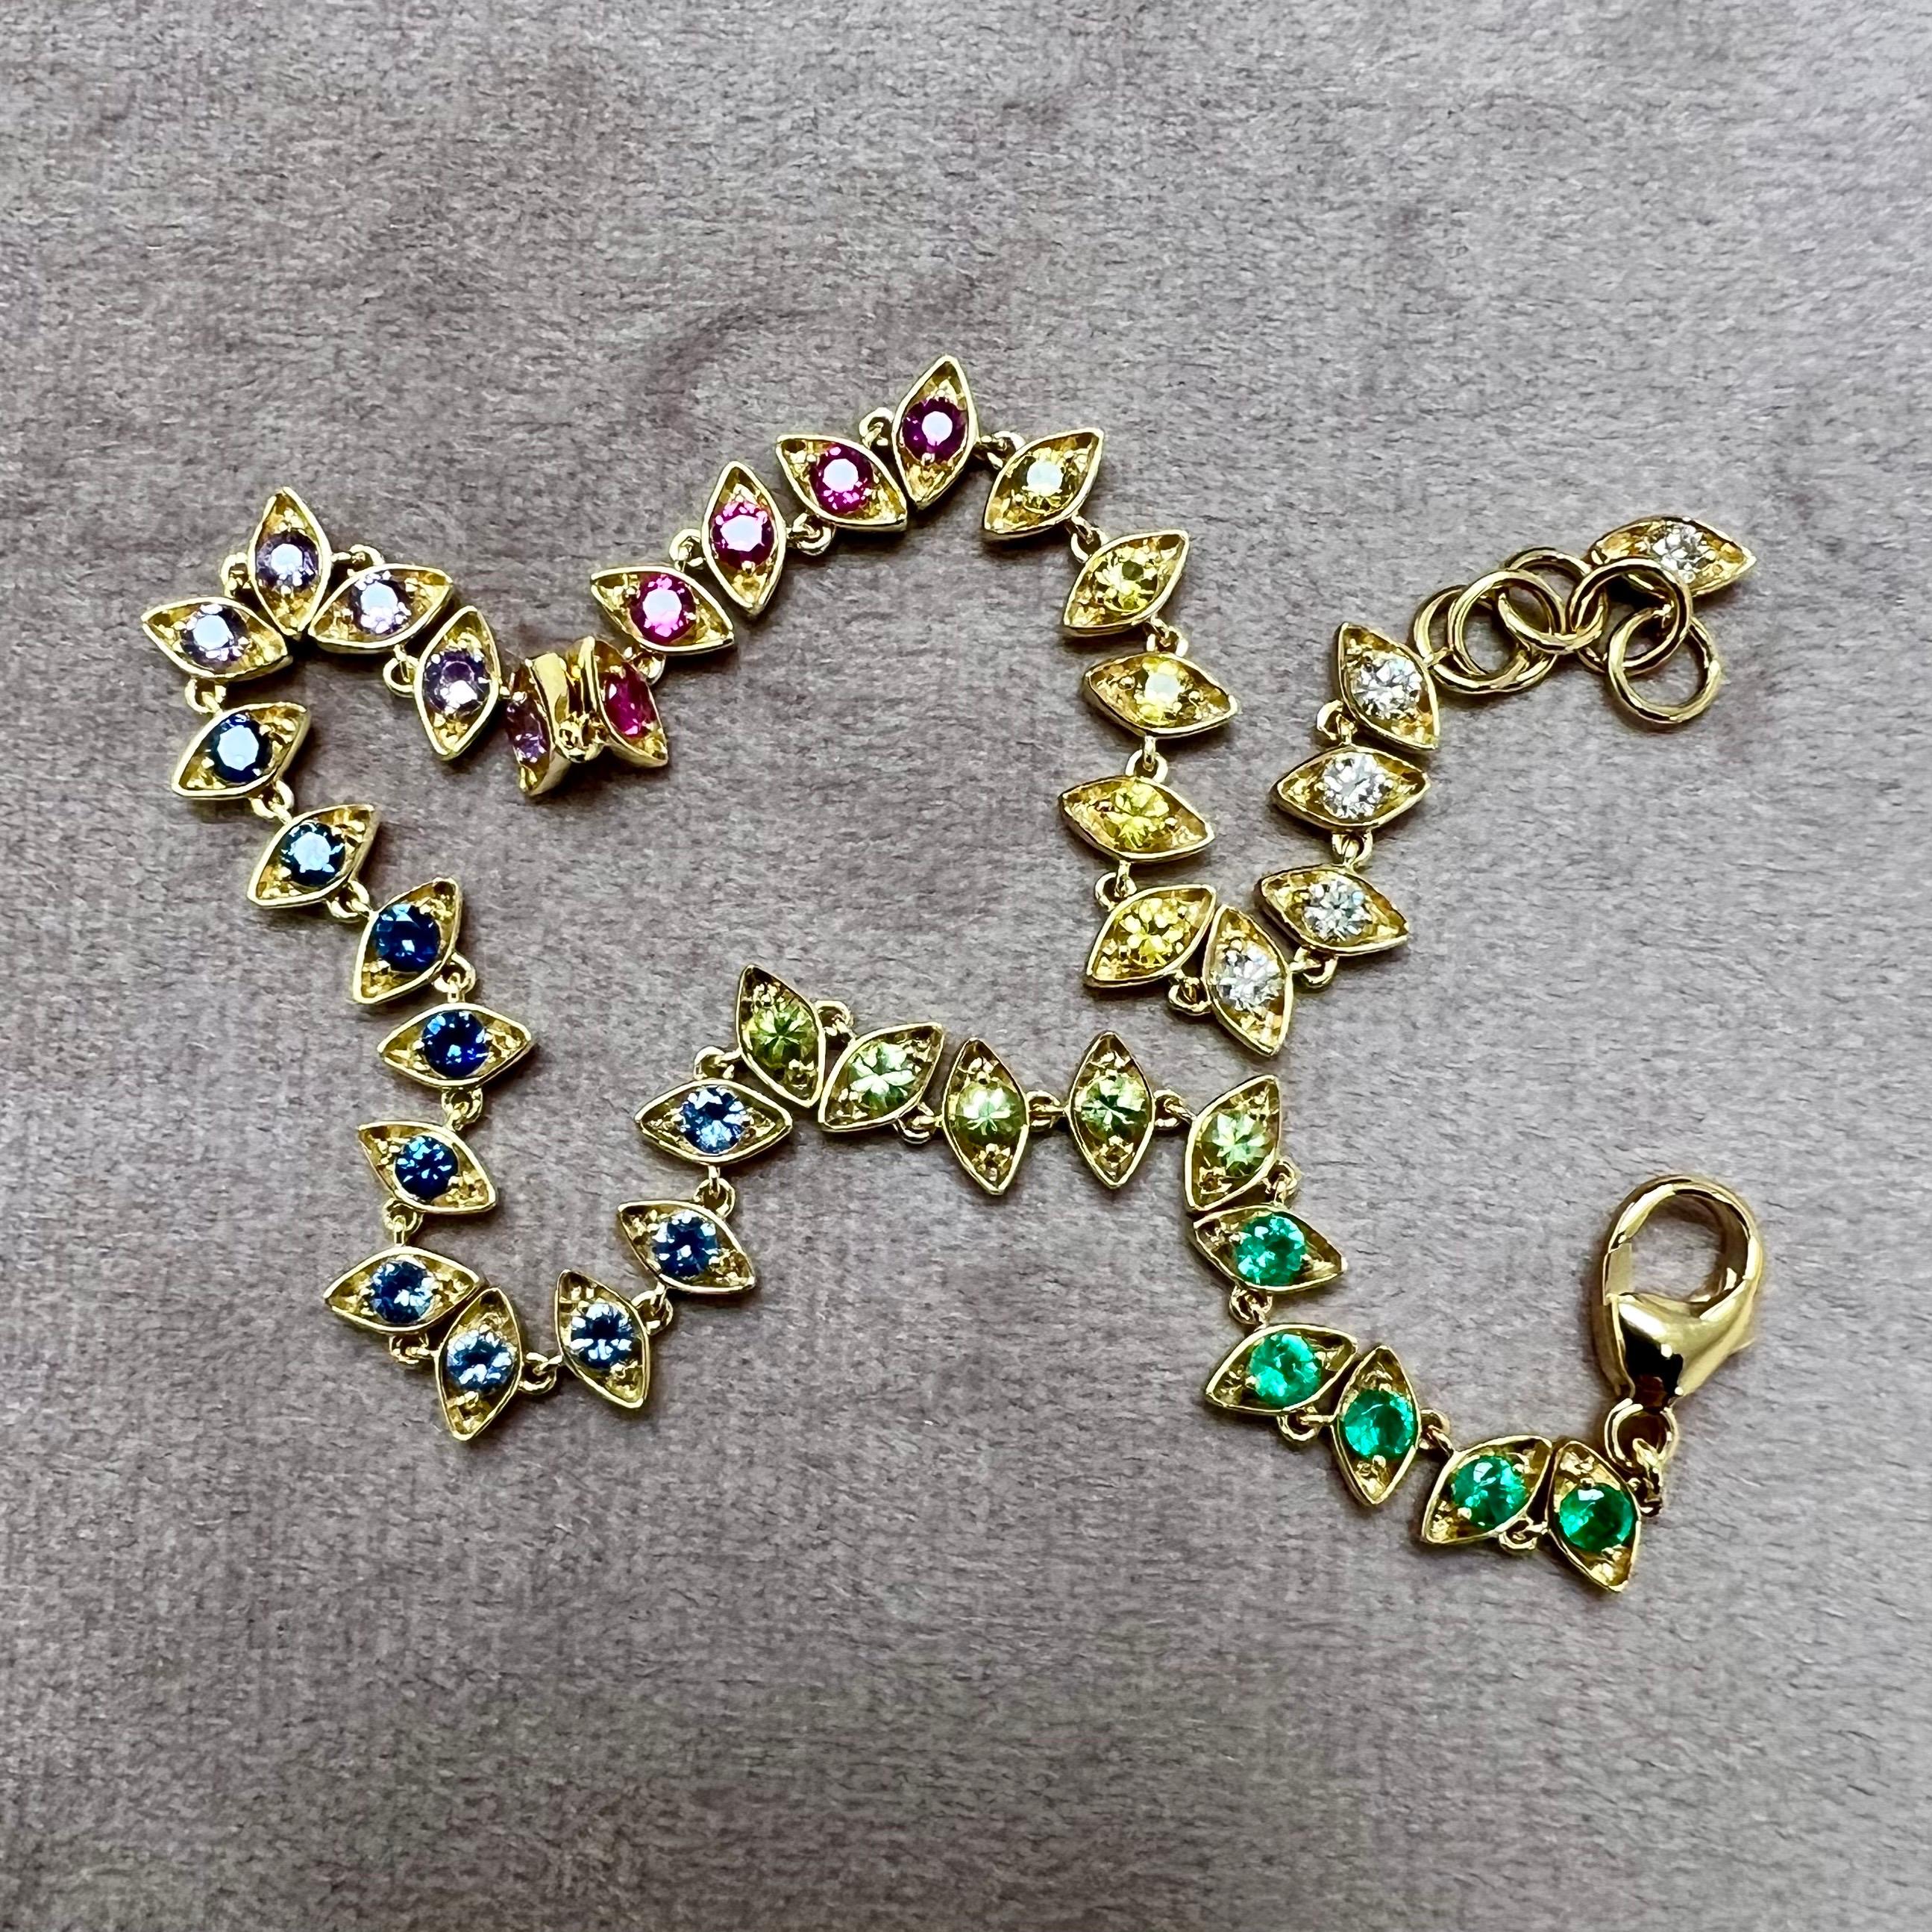 Created in 18 karat yellow gold
Rainbow Sapphires 2.20 carats approx.
Emeralds 0.30 carat approx.
Diamonds 0.30 carat approx.
8.5 inch length
18 karat yellow gold lobster clasp
Bracelet can be clasped at any length



About the Designers ~ Dharmesh